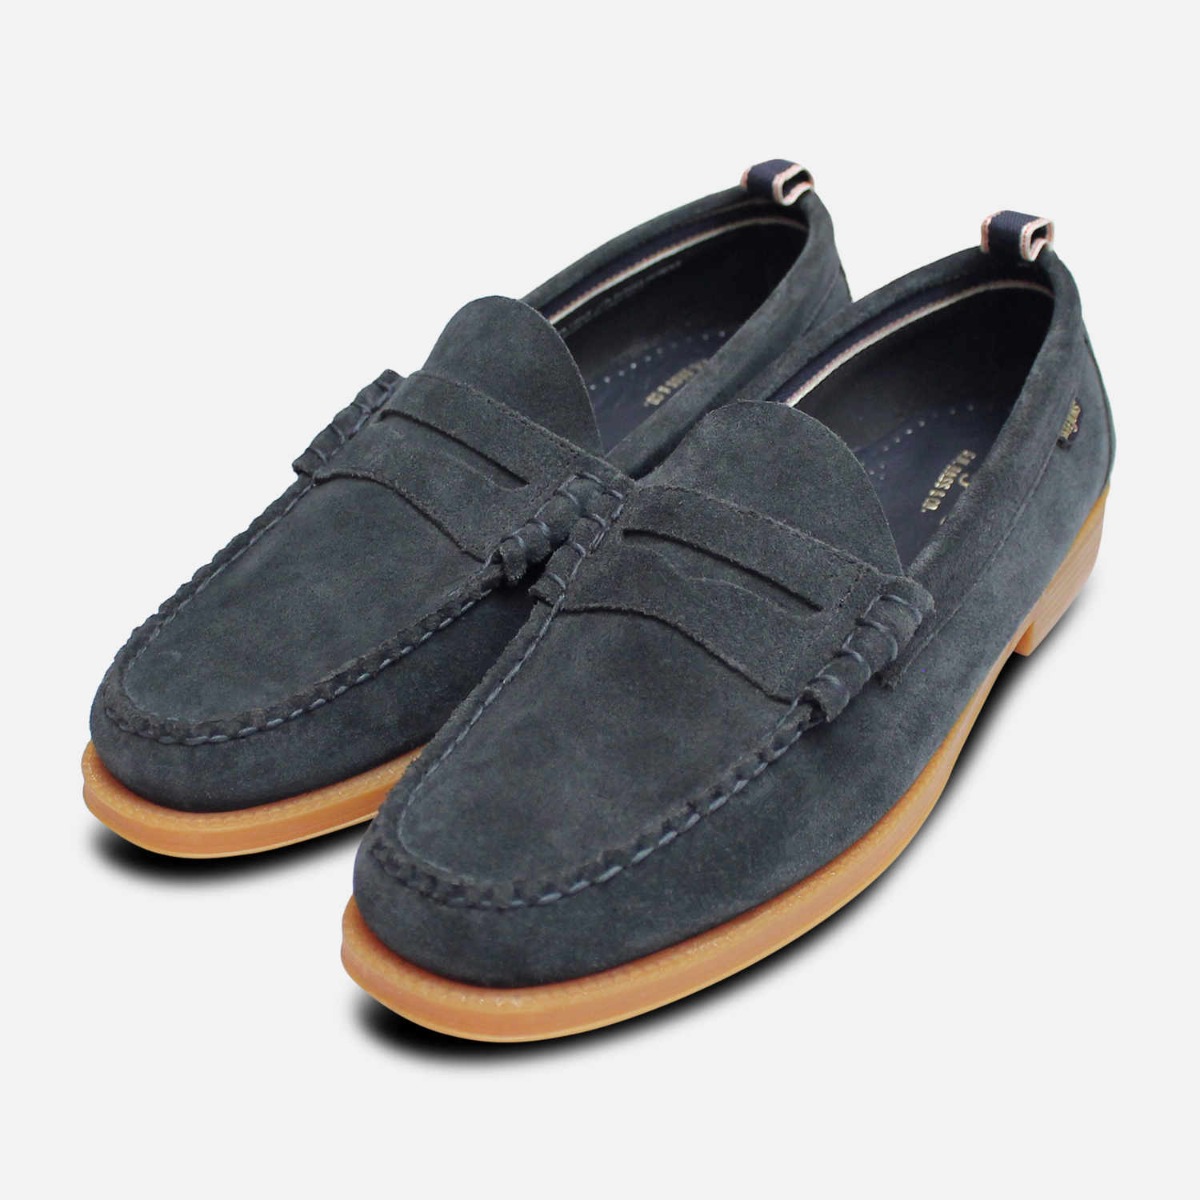 Bass Weejuns Jeans Blue Suede Leather 